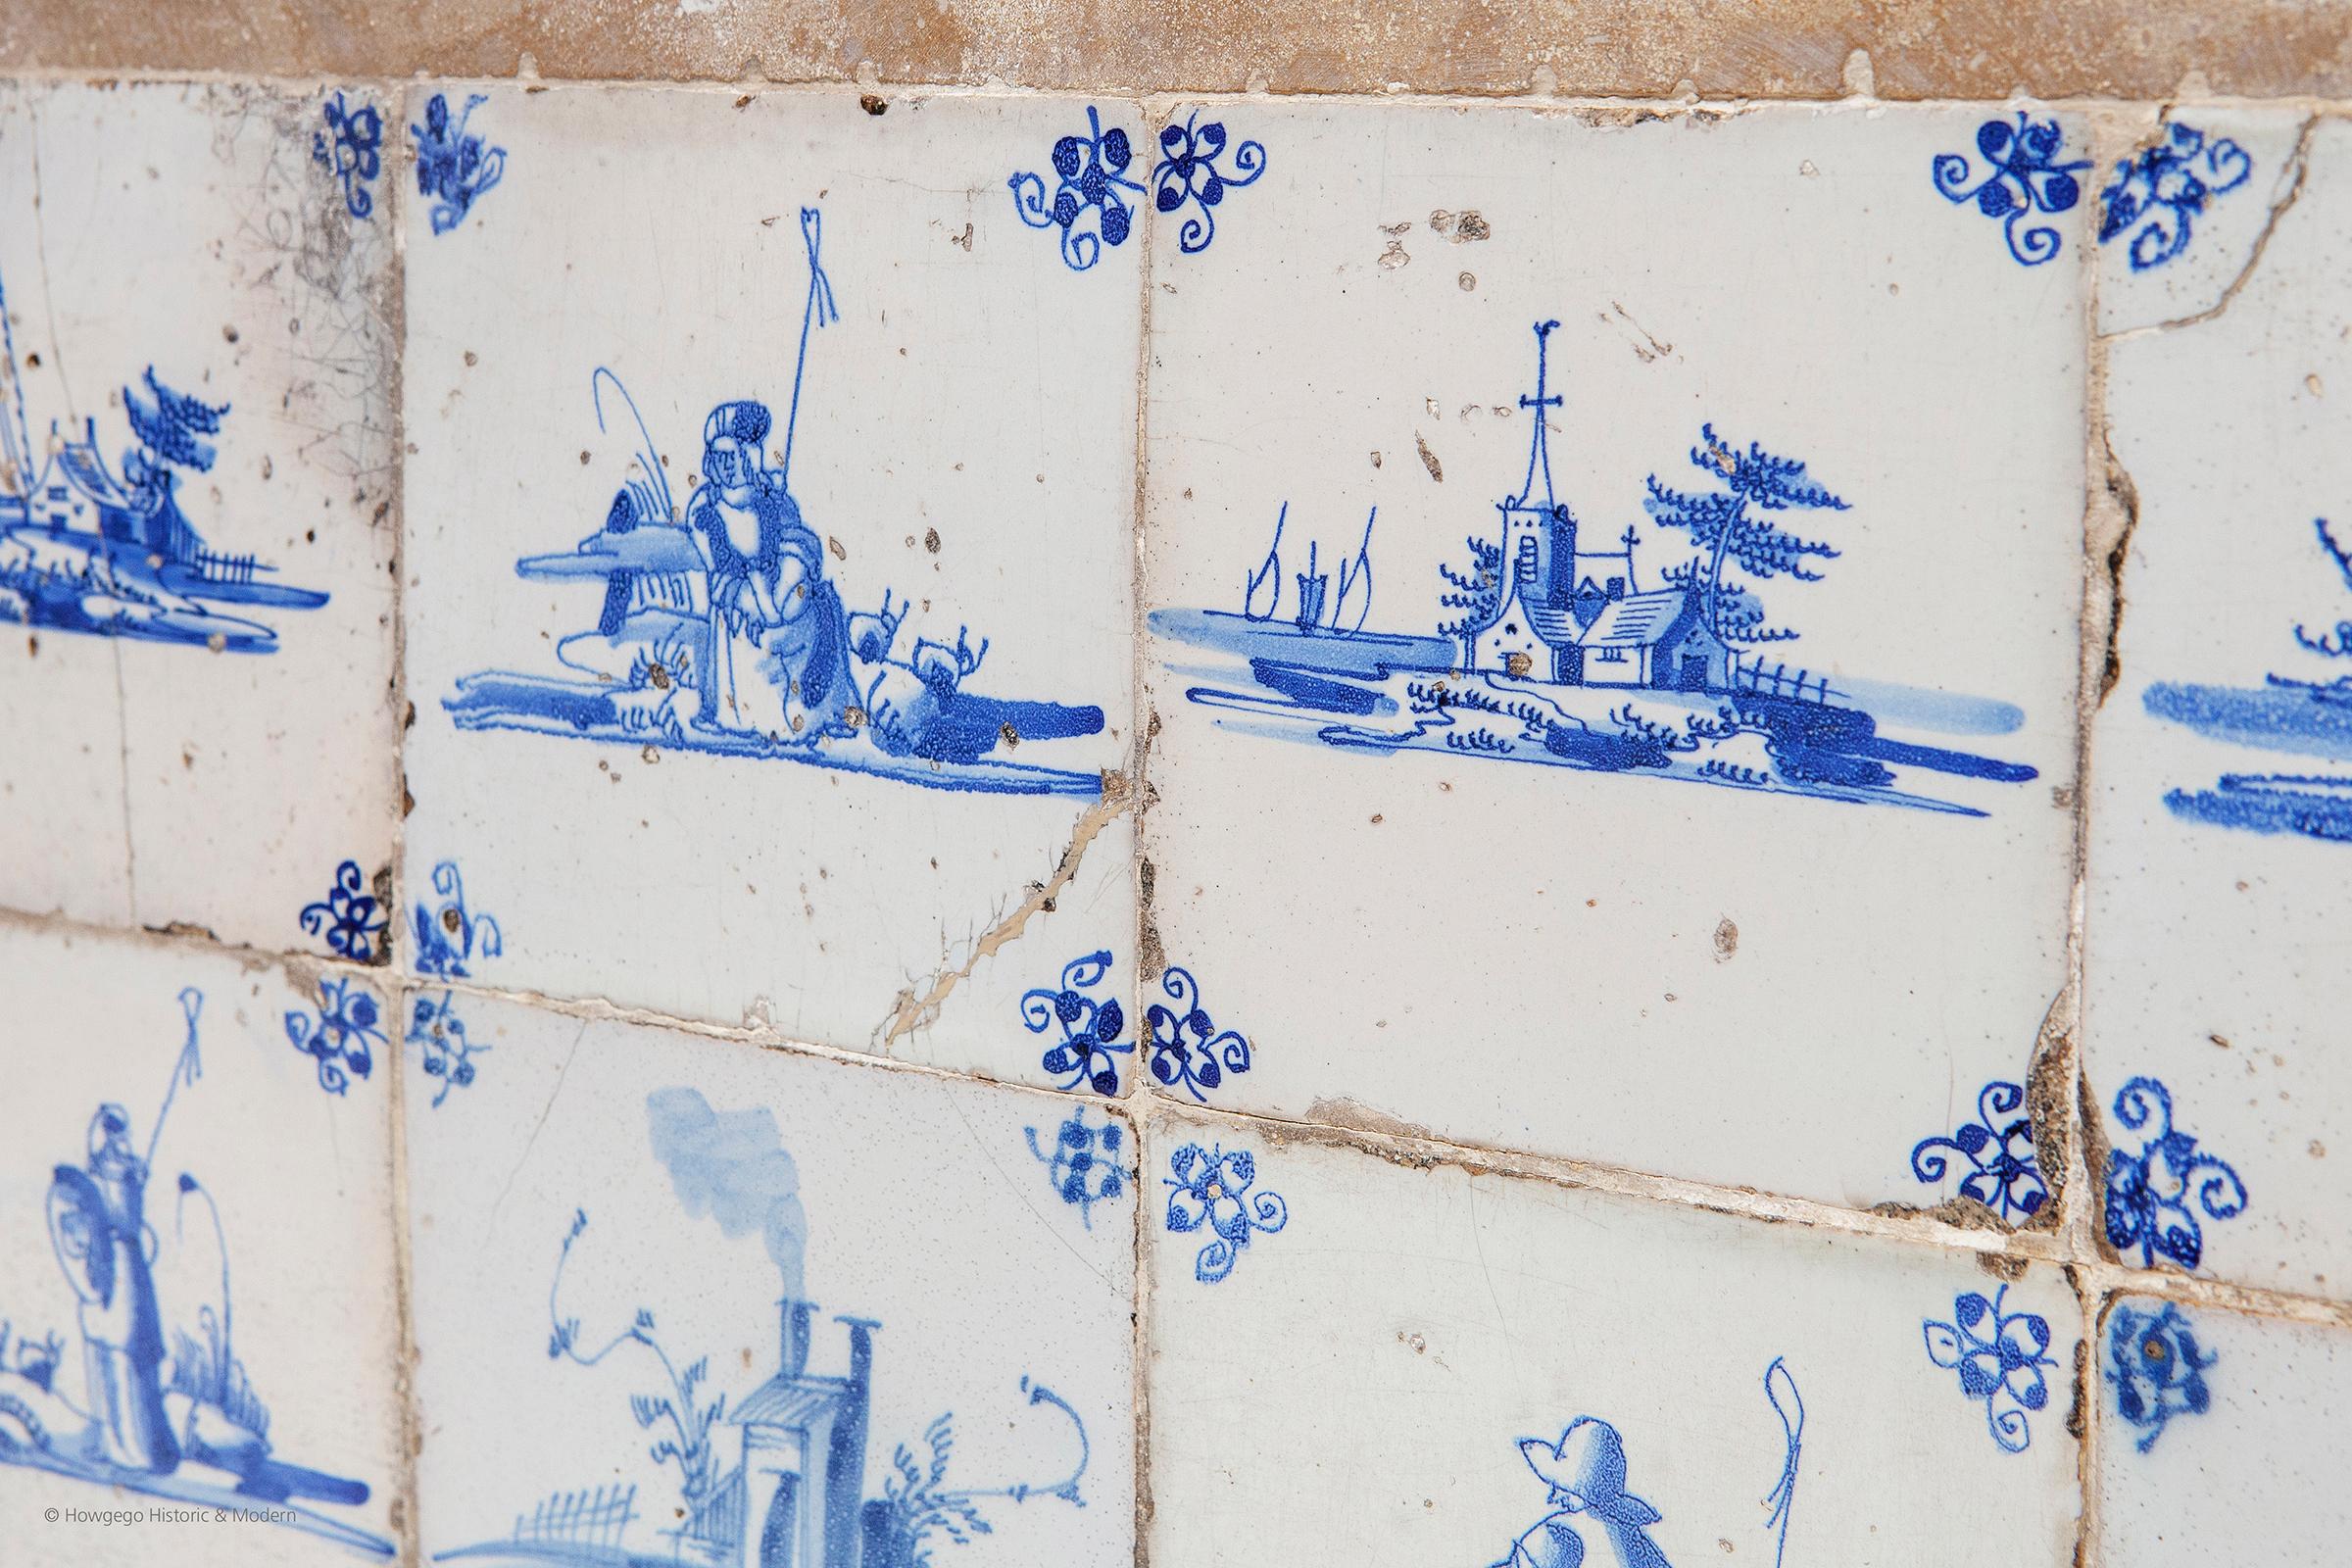 - Very unusual and striking large plaque
- Could be incorporated as an architectural feature

Decorated with 14, 18th century Delft tiles with characteristic blue and white, Dutch estuary scenes with skiffs and windmills and landscape scenes with